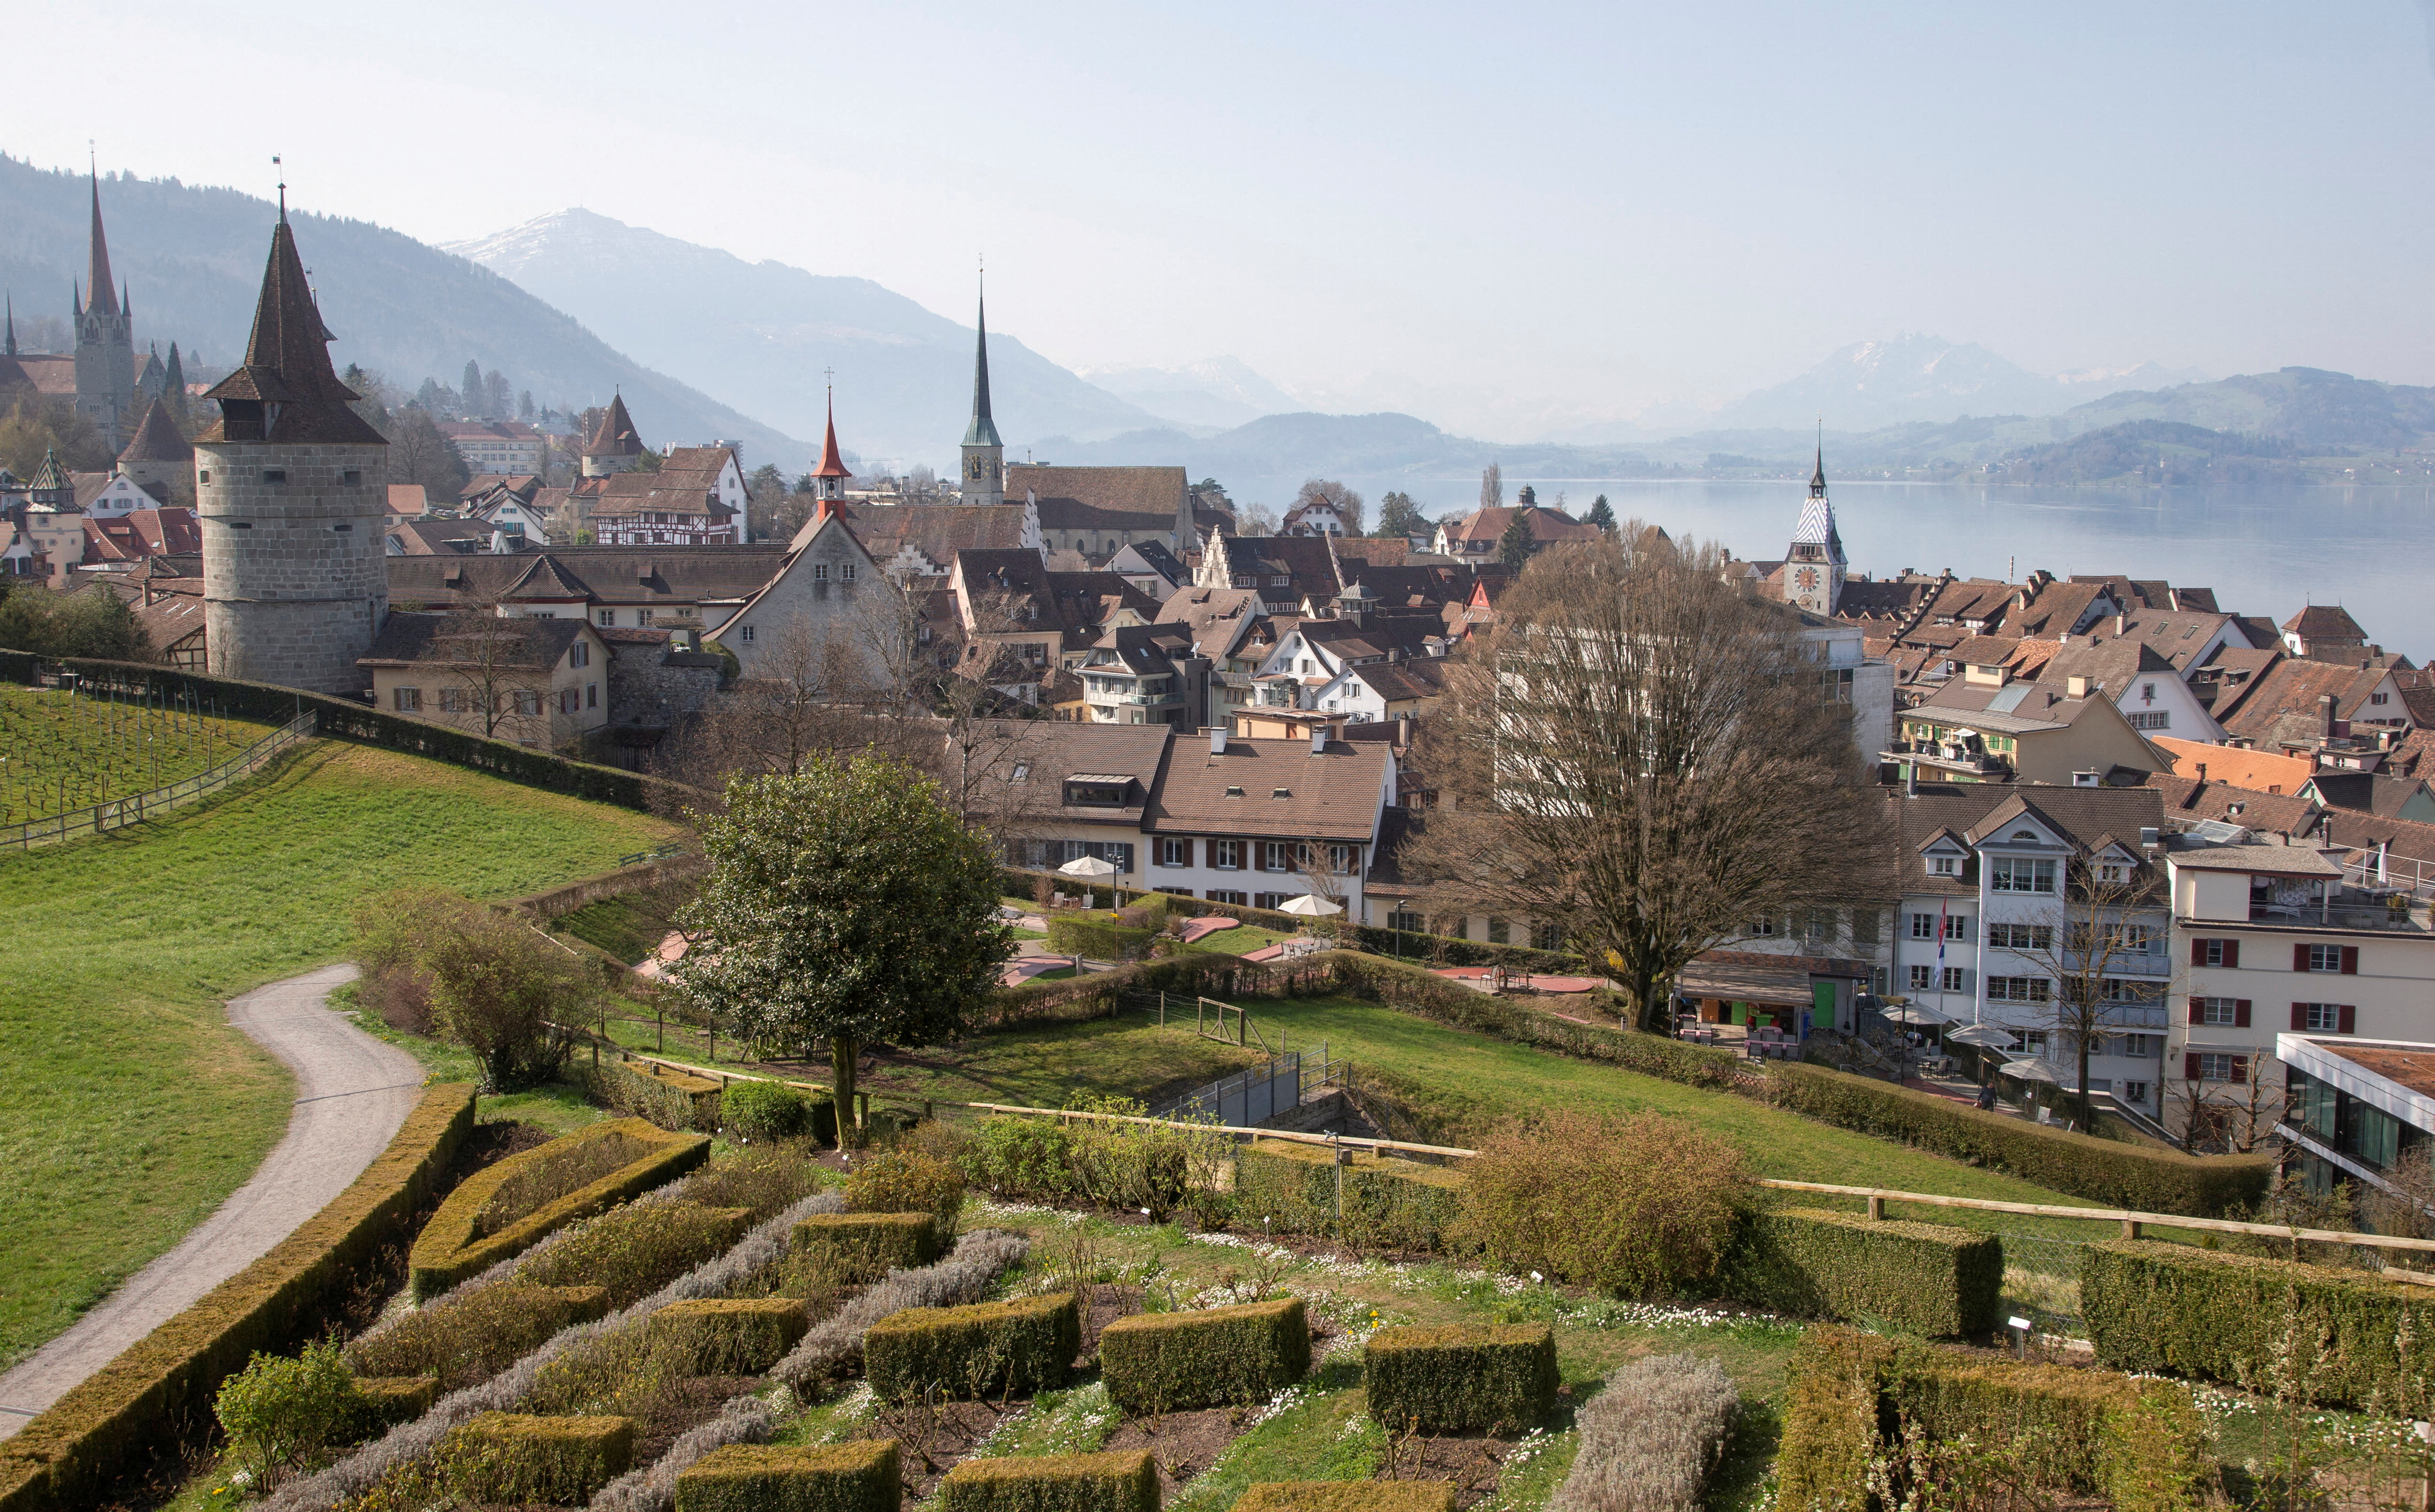 General view shows the central Swiss Alps and the town of Zug